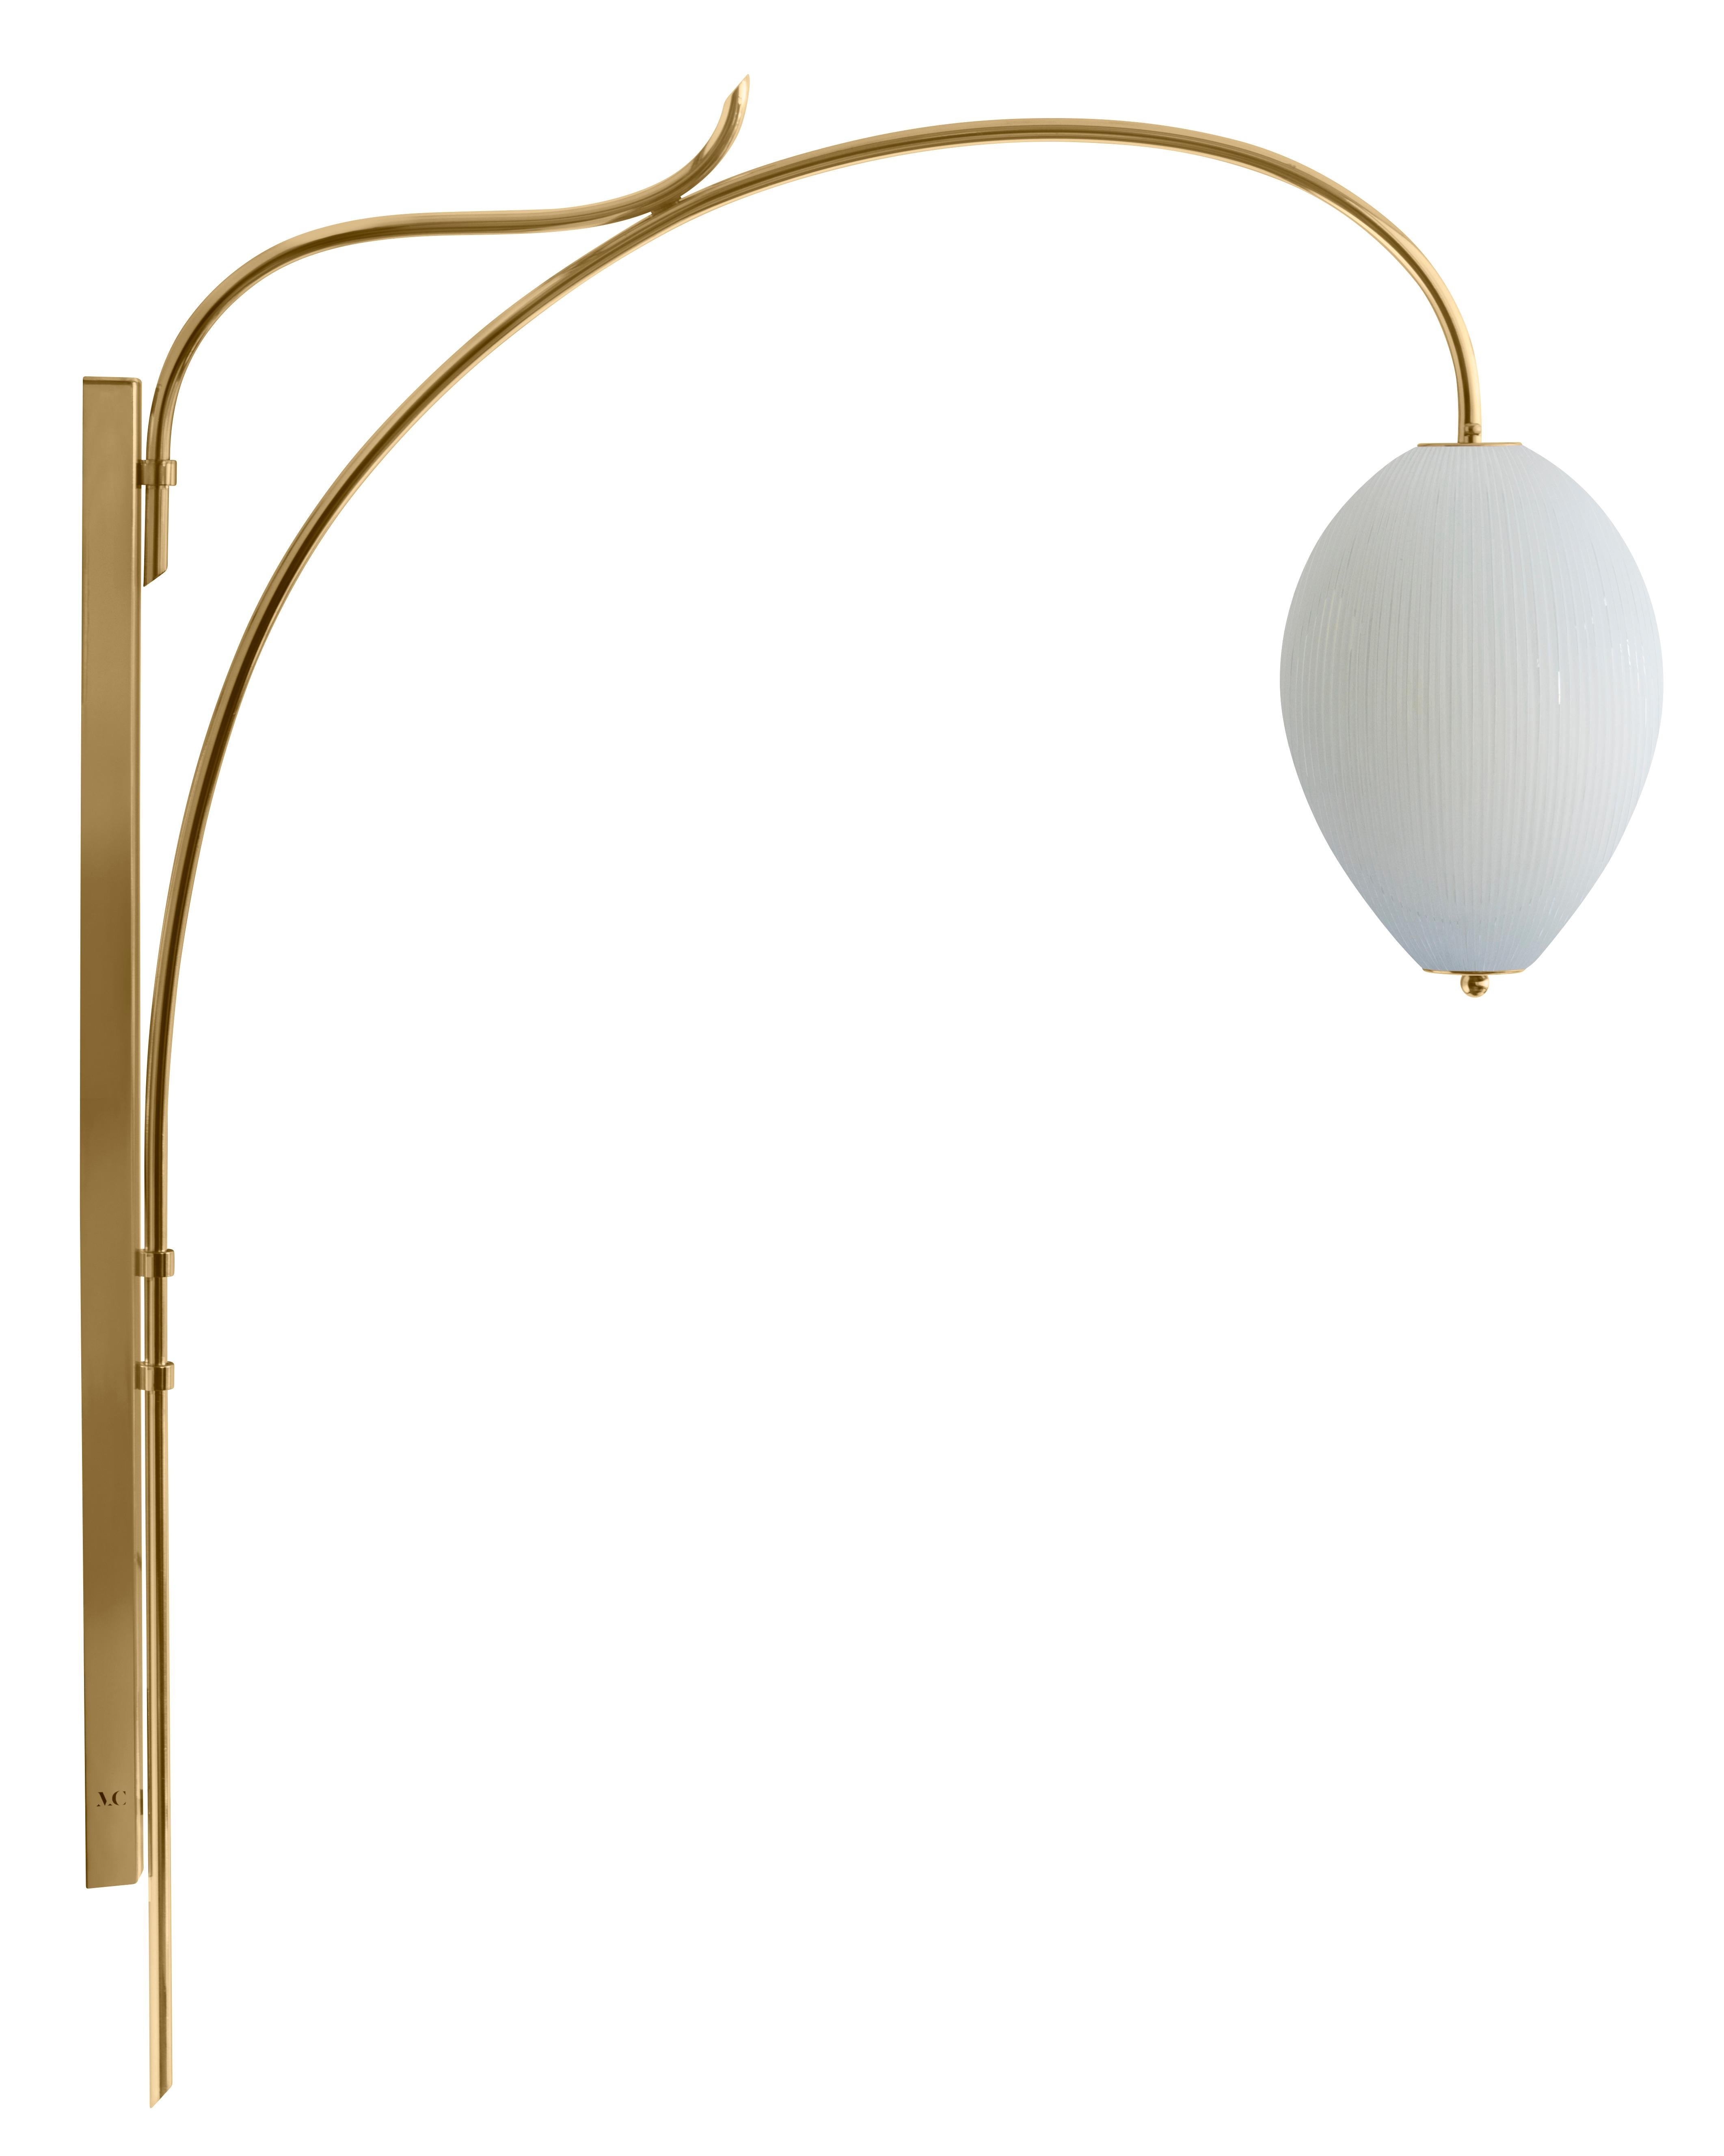 Wall lamp China 10 by Magic Circus Editions
Dimensions: H 134 x W 25.2 x D 113.5 cm
Materials: Brass, mouth blown glass sculpted with a diamond saw
Colour: rich grey

Available finishes: Brass, nickel
Available colours: enamel soft white, soft